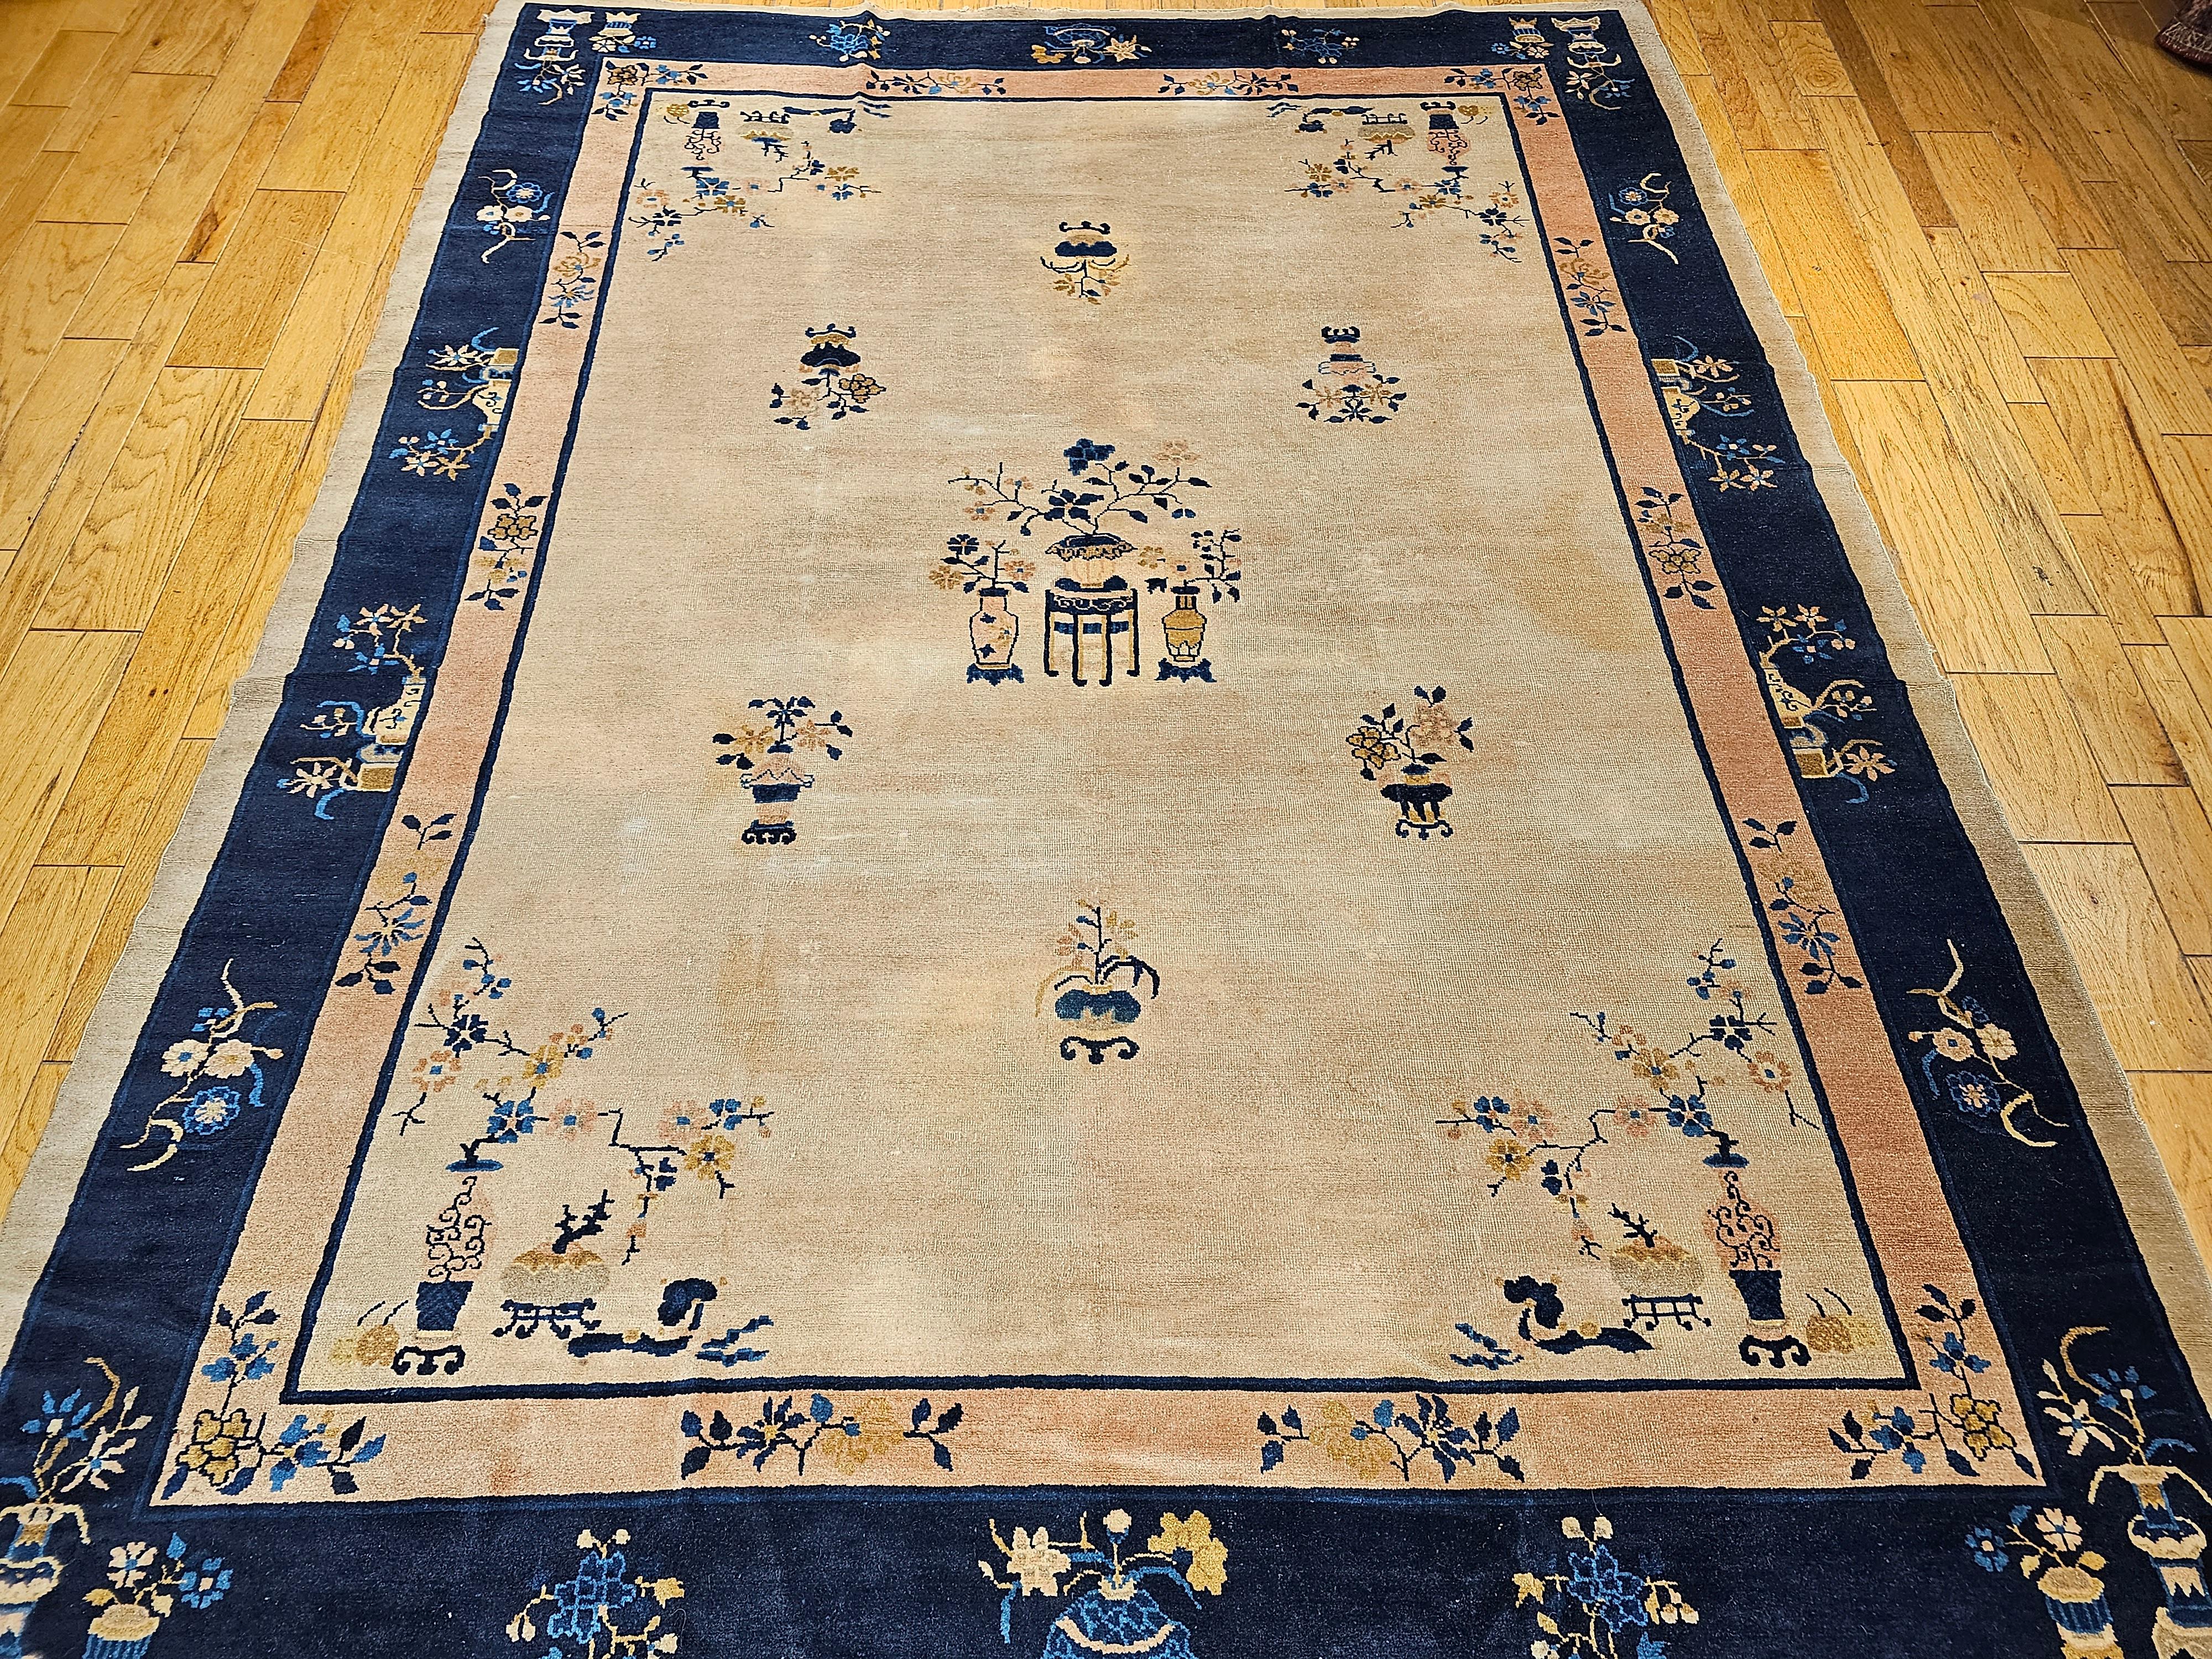 Beautiful Chinese Peking rug from the late 19th century with pale yellow/tan field color and border in blue and pale peach/pink border.  The Chinese Peking rug has the traditional flower vase design in the border and on the corners.   The Chinese